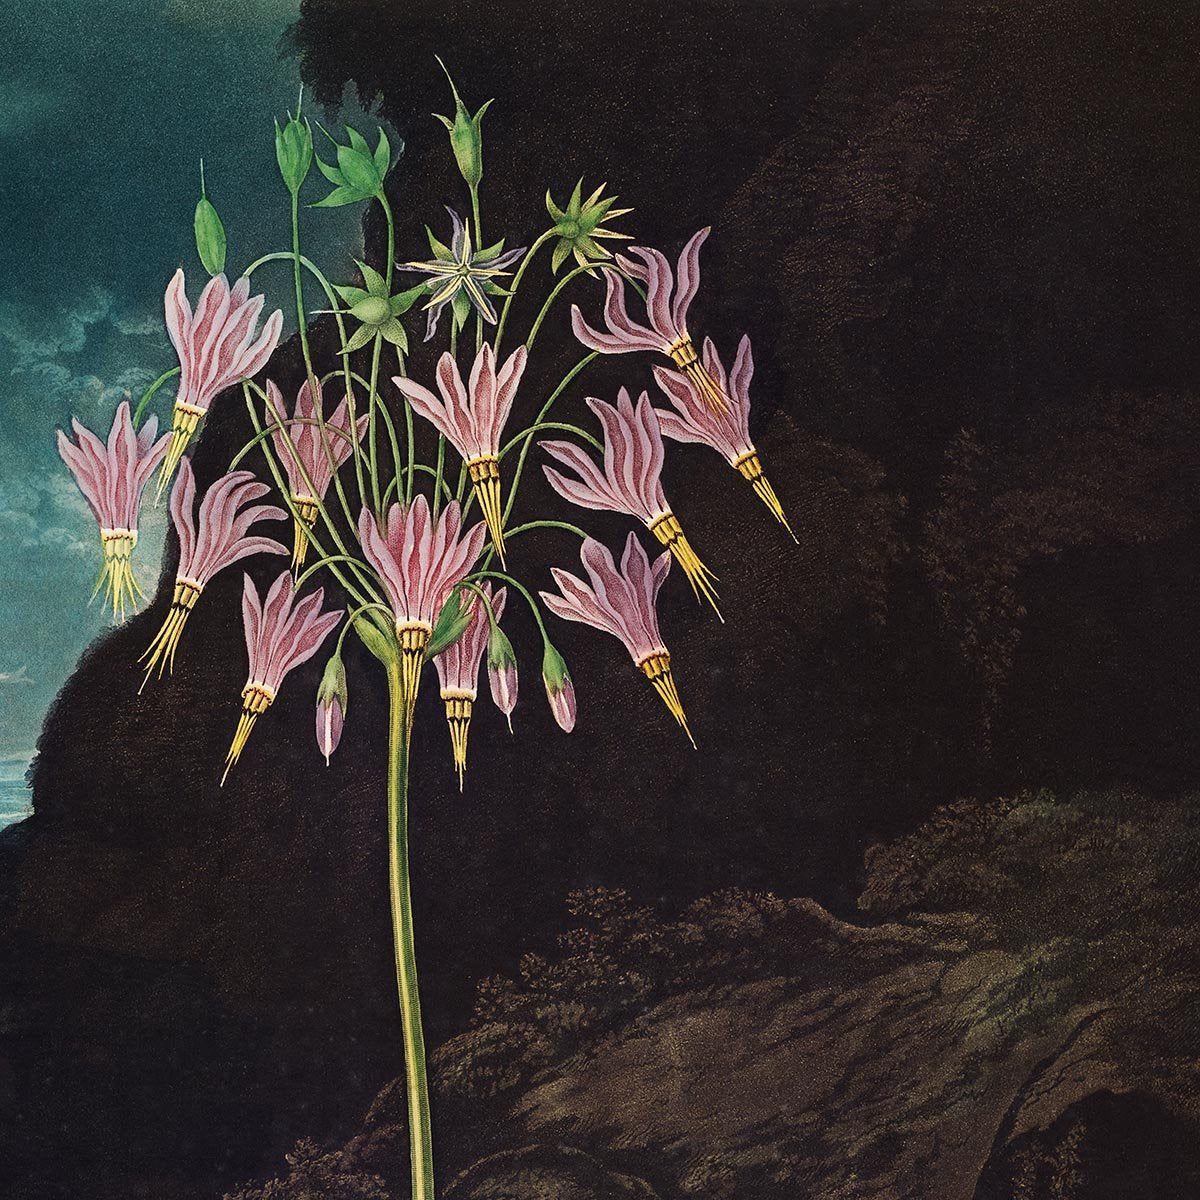 The American Cowslip from The Temple of Flora